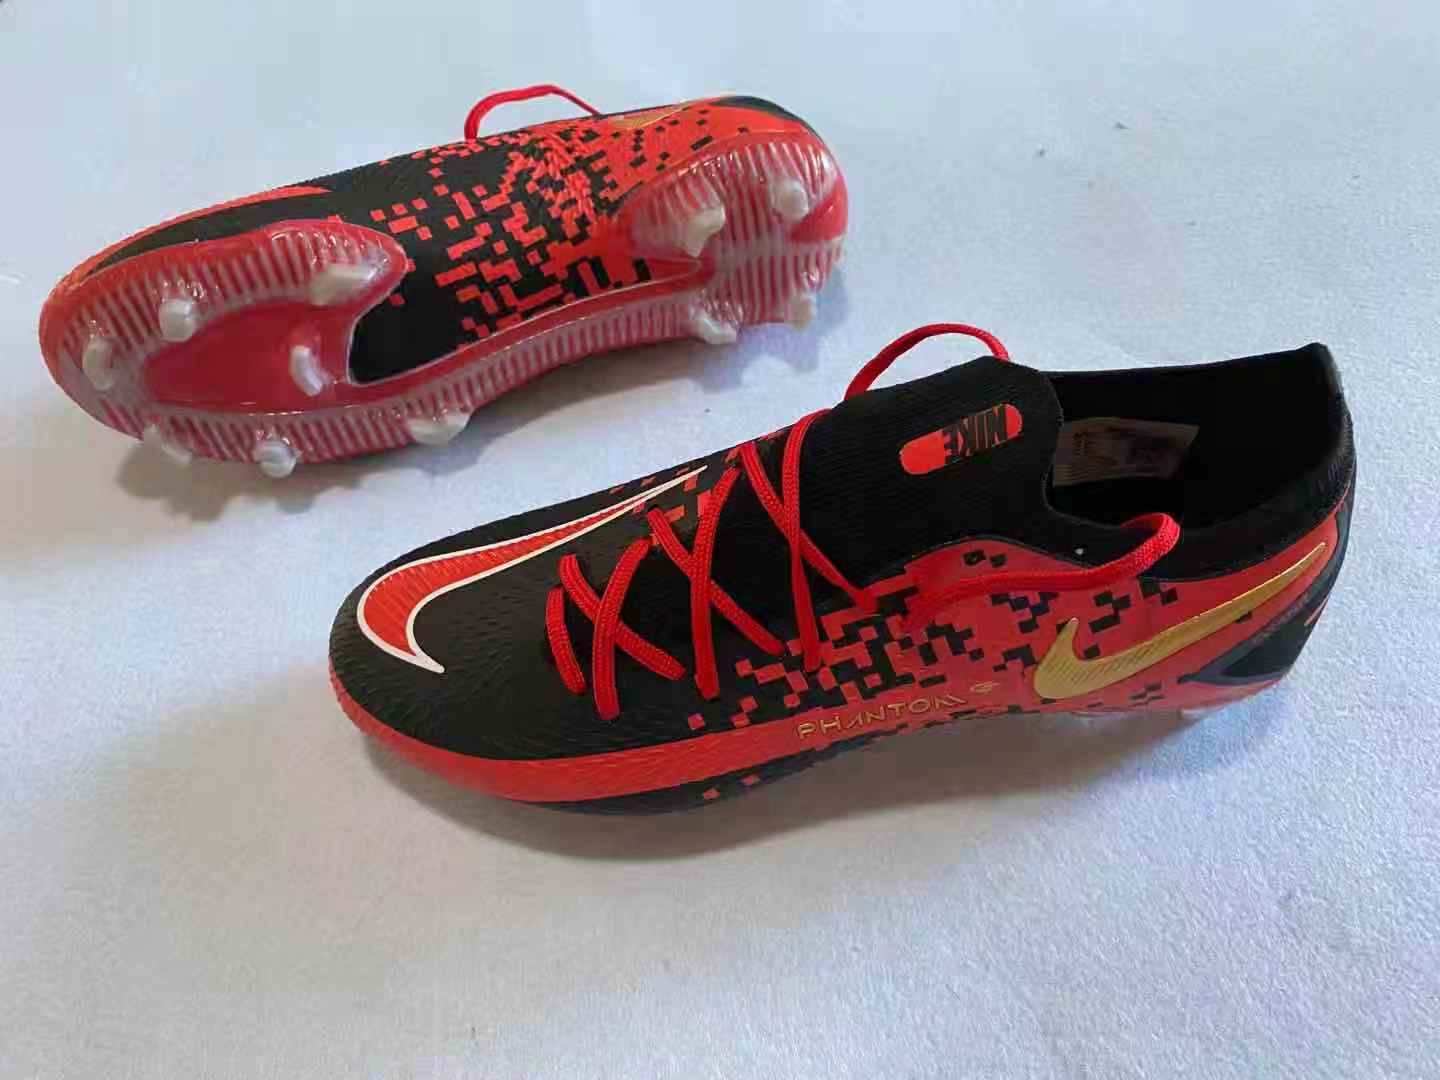 Nike Phantom GT Elite FG SIZE red and black football boots